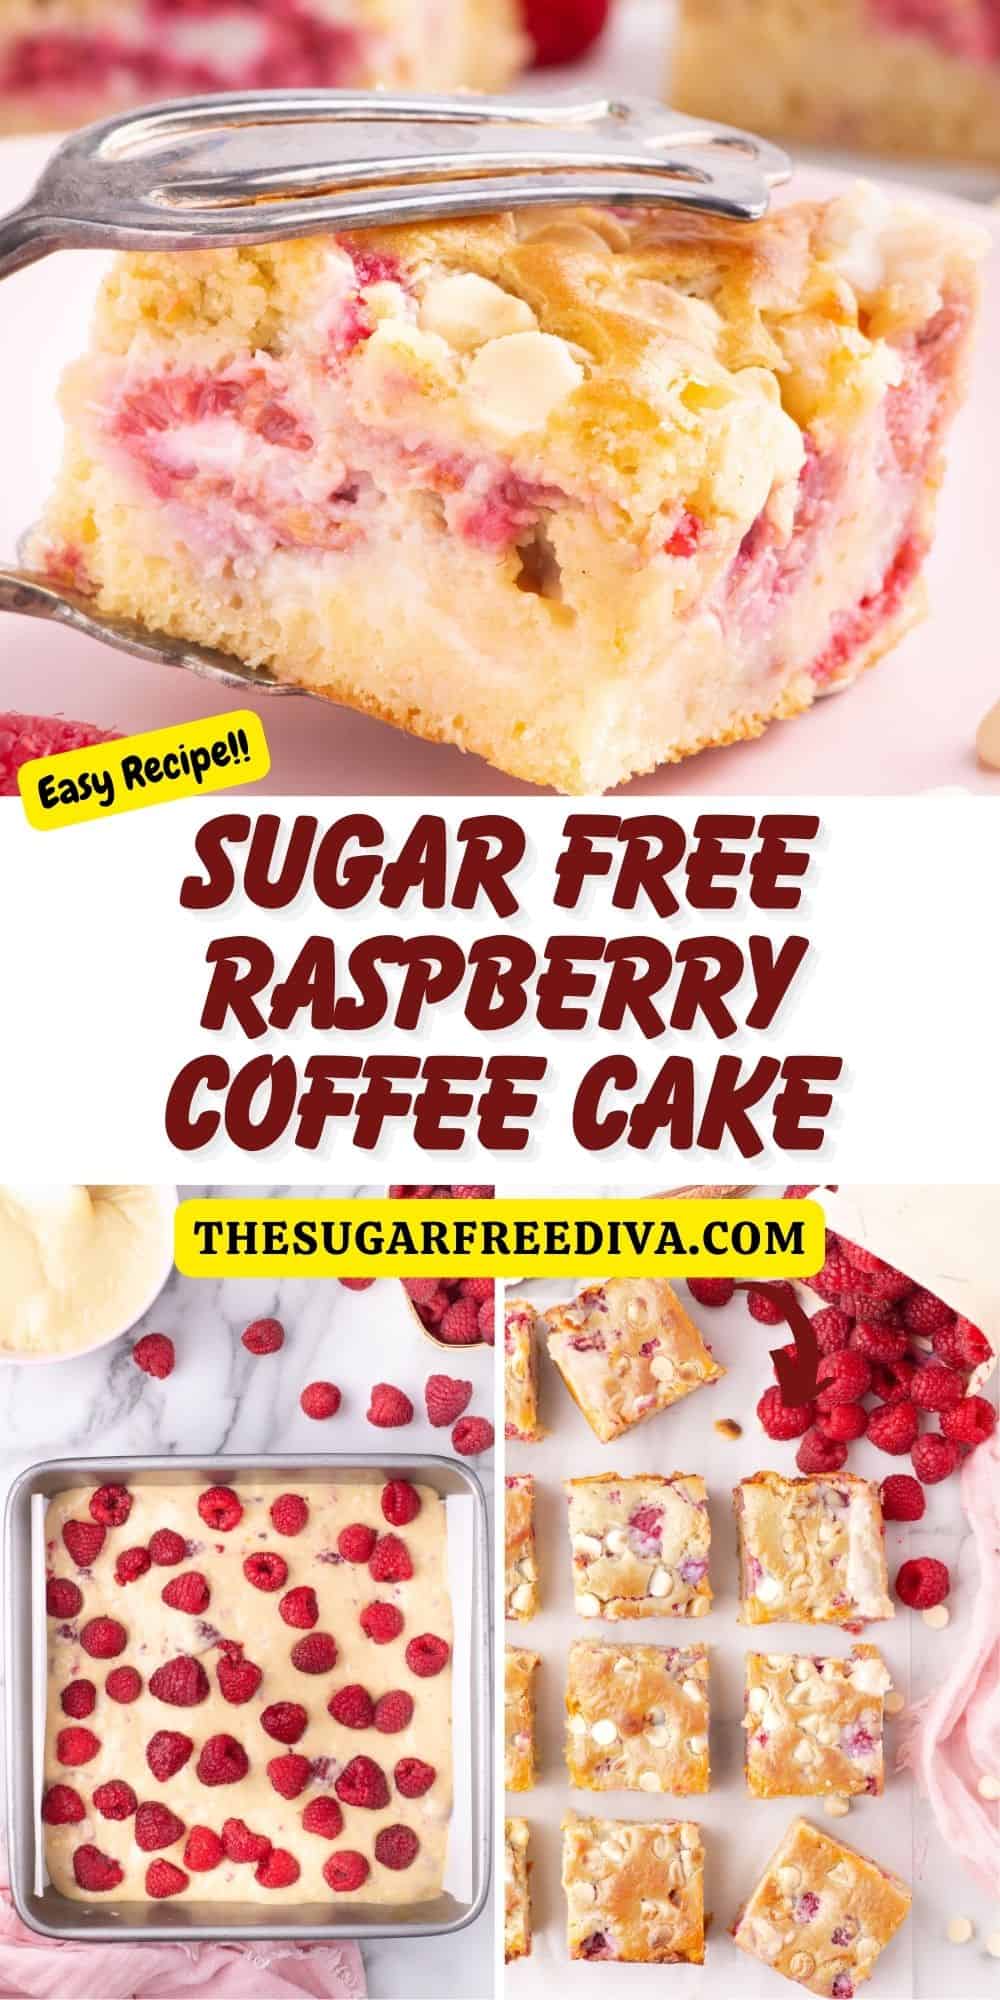 Sugar Free Raspberry Coffee Cake, an easy and delicious breakfast, brunch, or dessert recipe made with fresh raspberries and no added sugar.